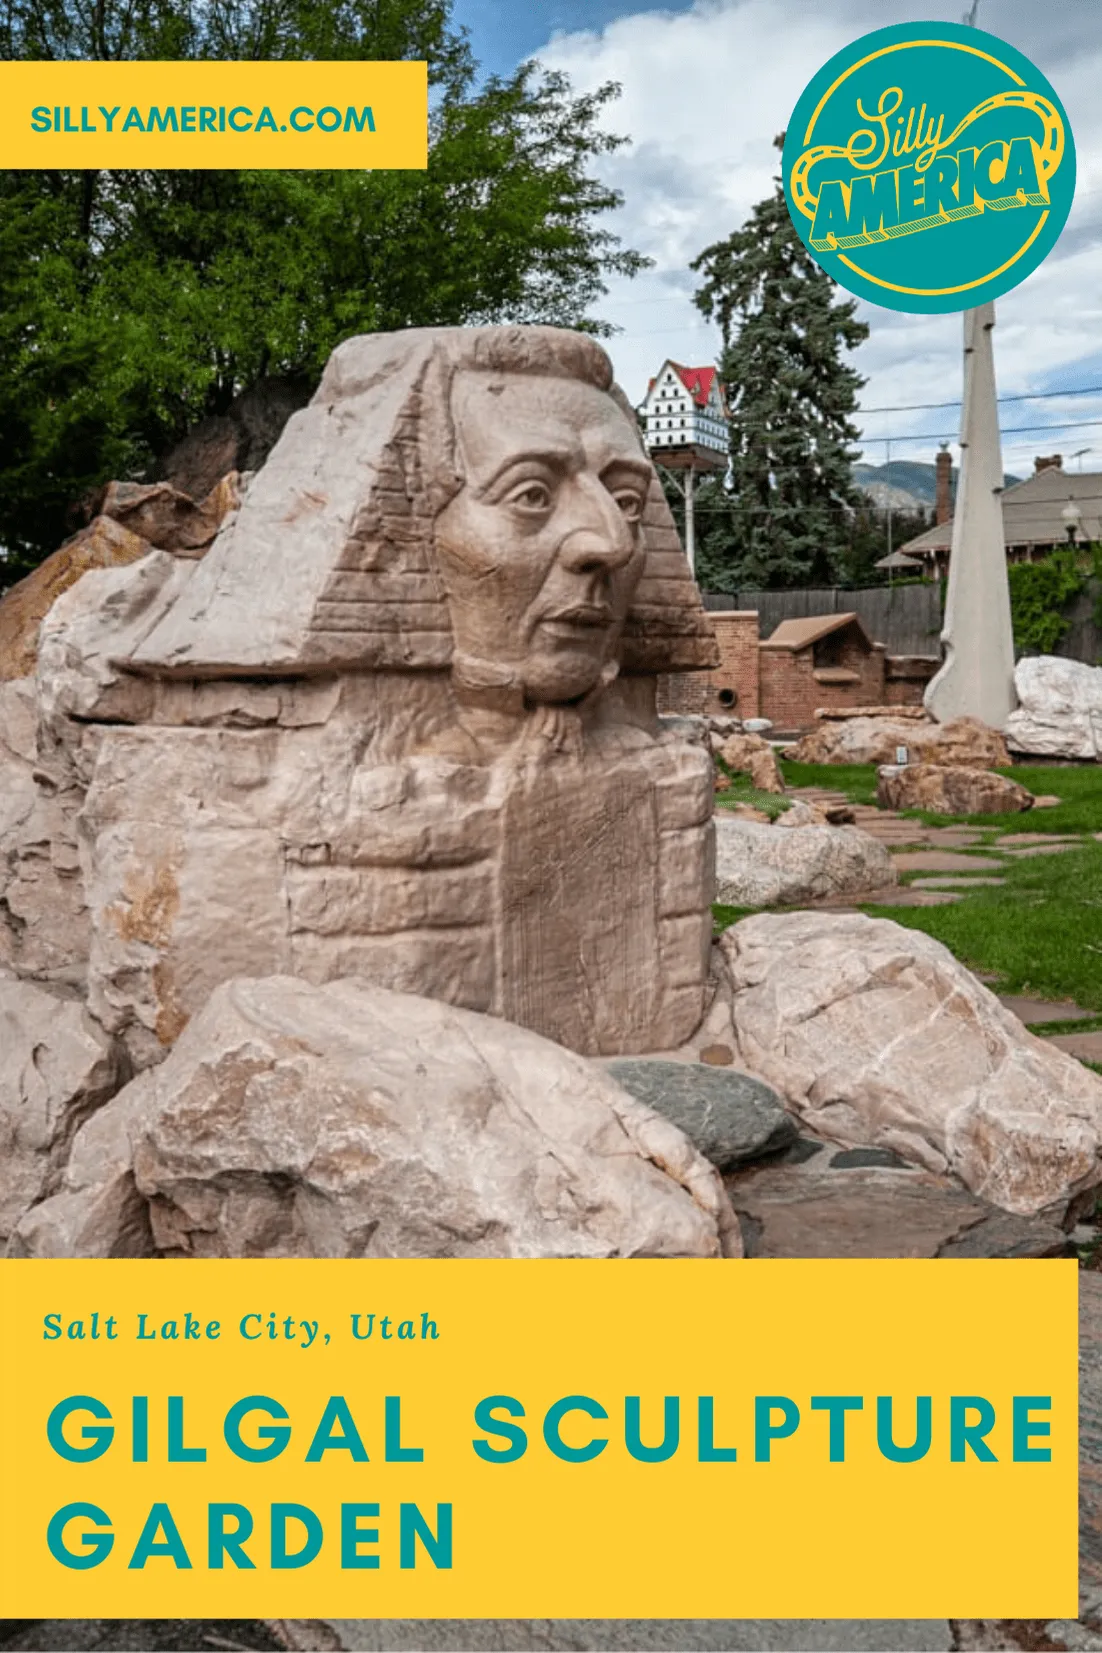 Gilgal Sculpture Garden, a small public city park in Salt Lake City, Utah, is the work of Thomas Battersby Child, Jr. and displays Mormon sculptures. #UtahRoadsideAttractions #UtahRoadsideAttraction #RoadsideAttractions #RoadsideAttraction #RoadTrip #UtahRoadTrip #UtahRoadTripWithKids #UtahRoadTripBucketLists #UtahBucketList  #UtahRoadTripItinerary #UtahRoadTripPictures #UtahRoadTripMap #UtahWeekendRoadTrip #SaltLakeCityRoadTrip #UtahRoadTripAdventure